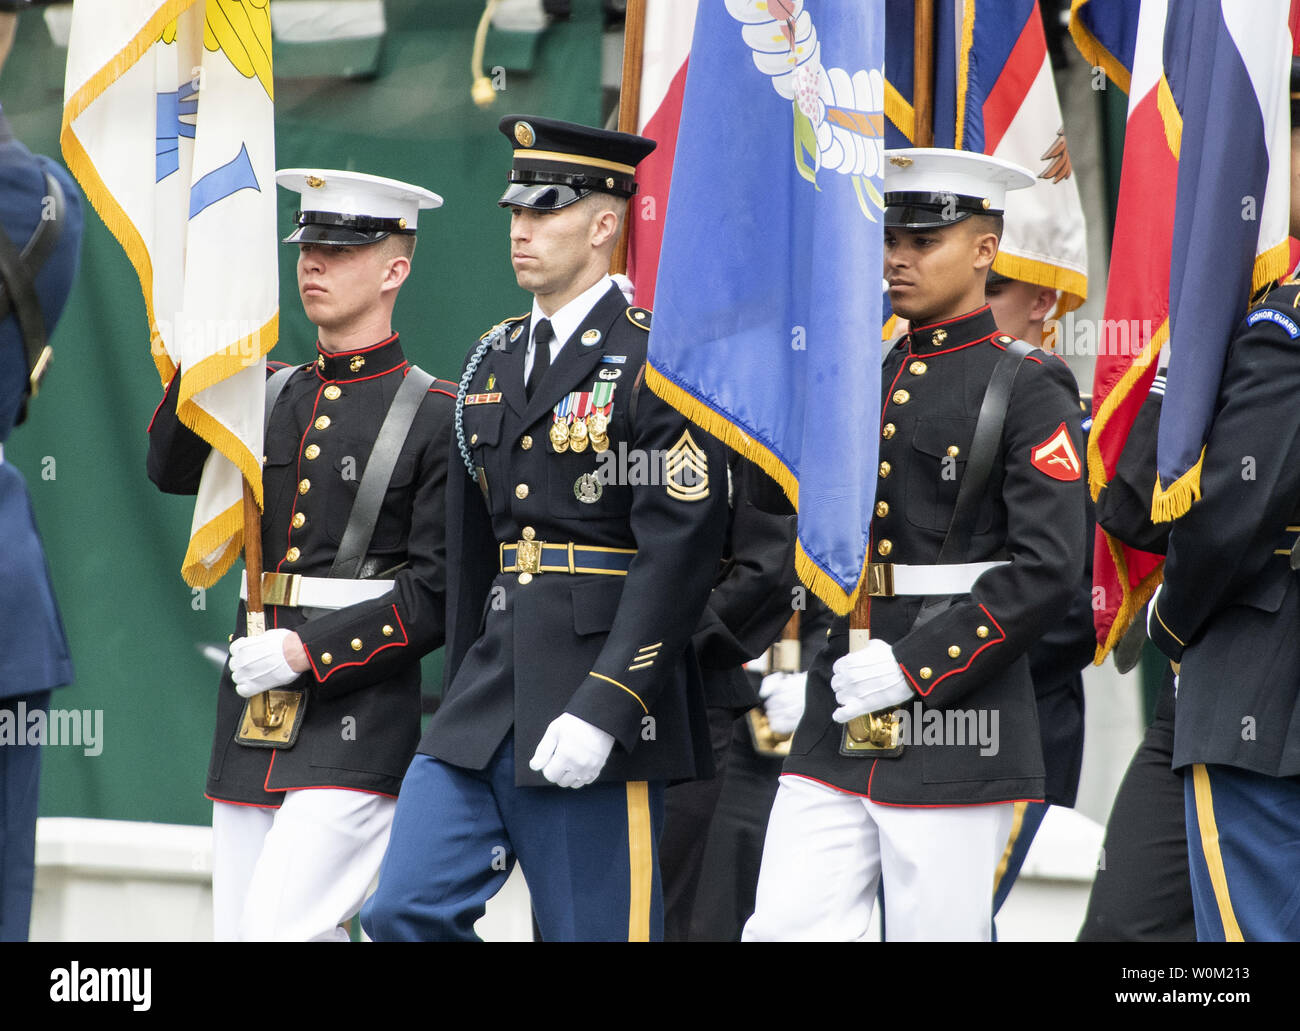 Honor Guard march in formation as the await the arrival of Egyptian President Abdel Fattah el-Sisi at the the West Wing of the White House in Washington, DC on April 9, 2019.  El-Sisi is visiting the White House for talks with President Donald Trump.     Photo by Pat Benic/UPI Stock Photo